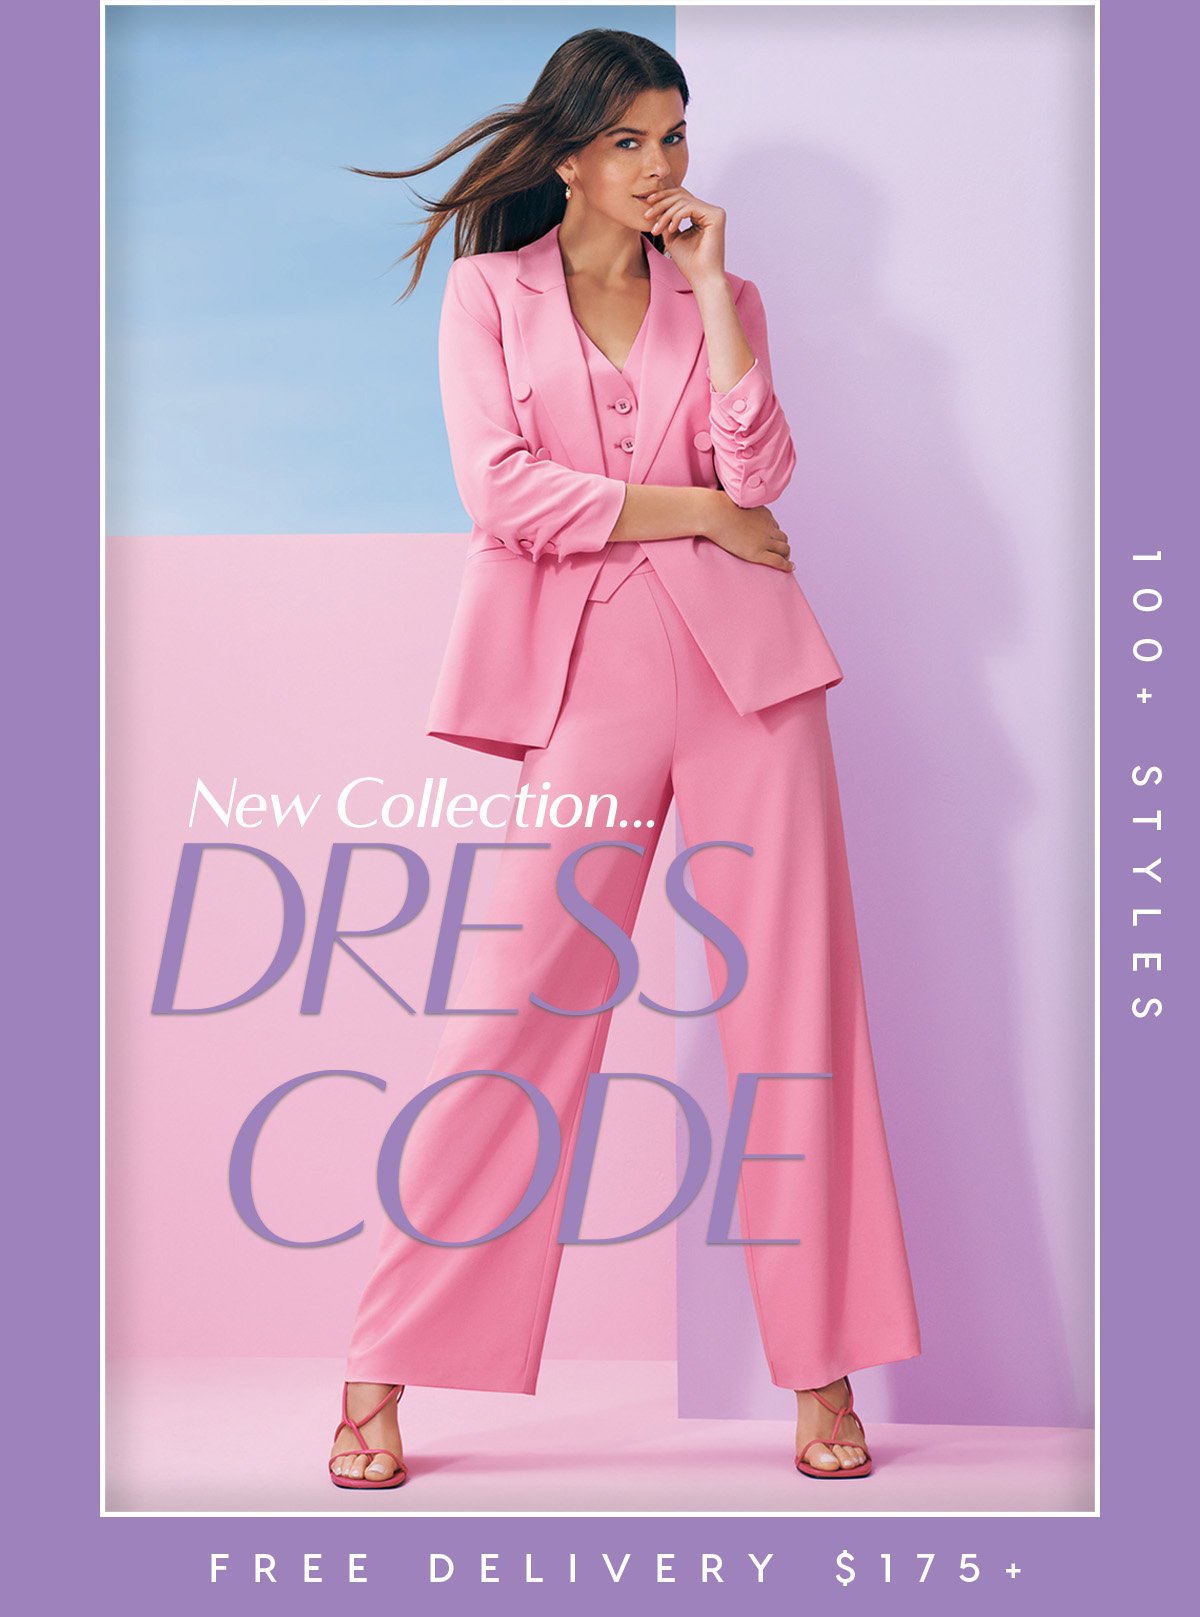 New Collection: Dress Code